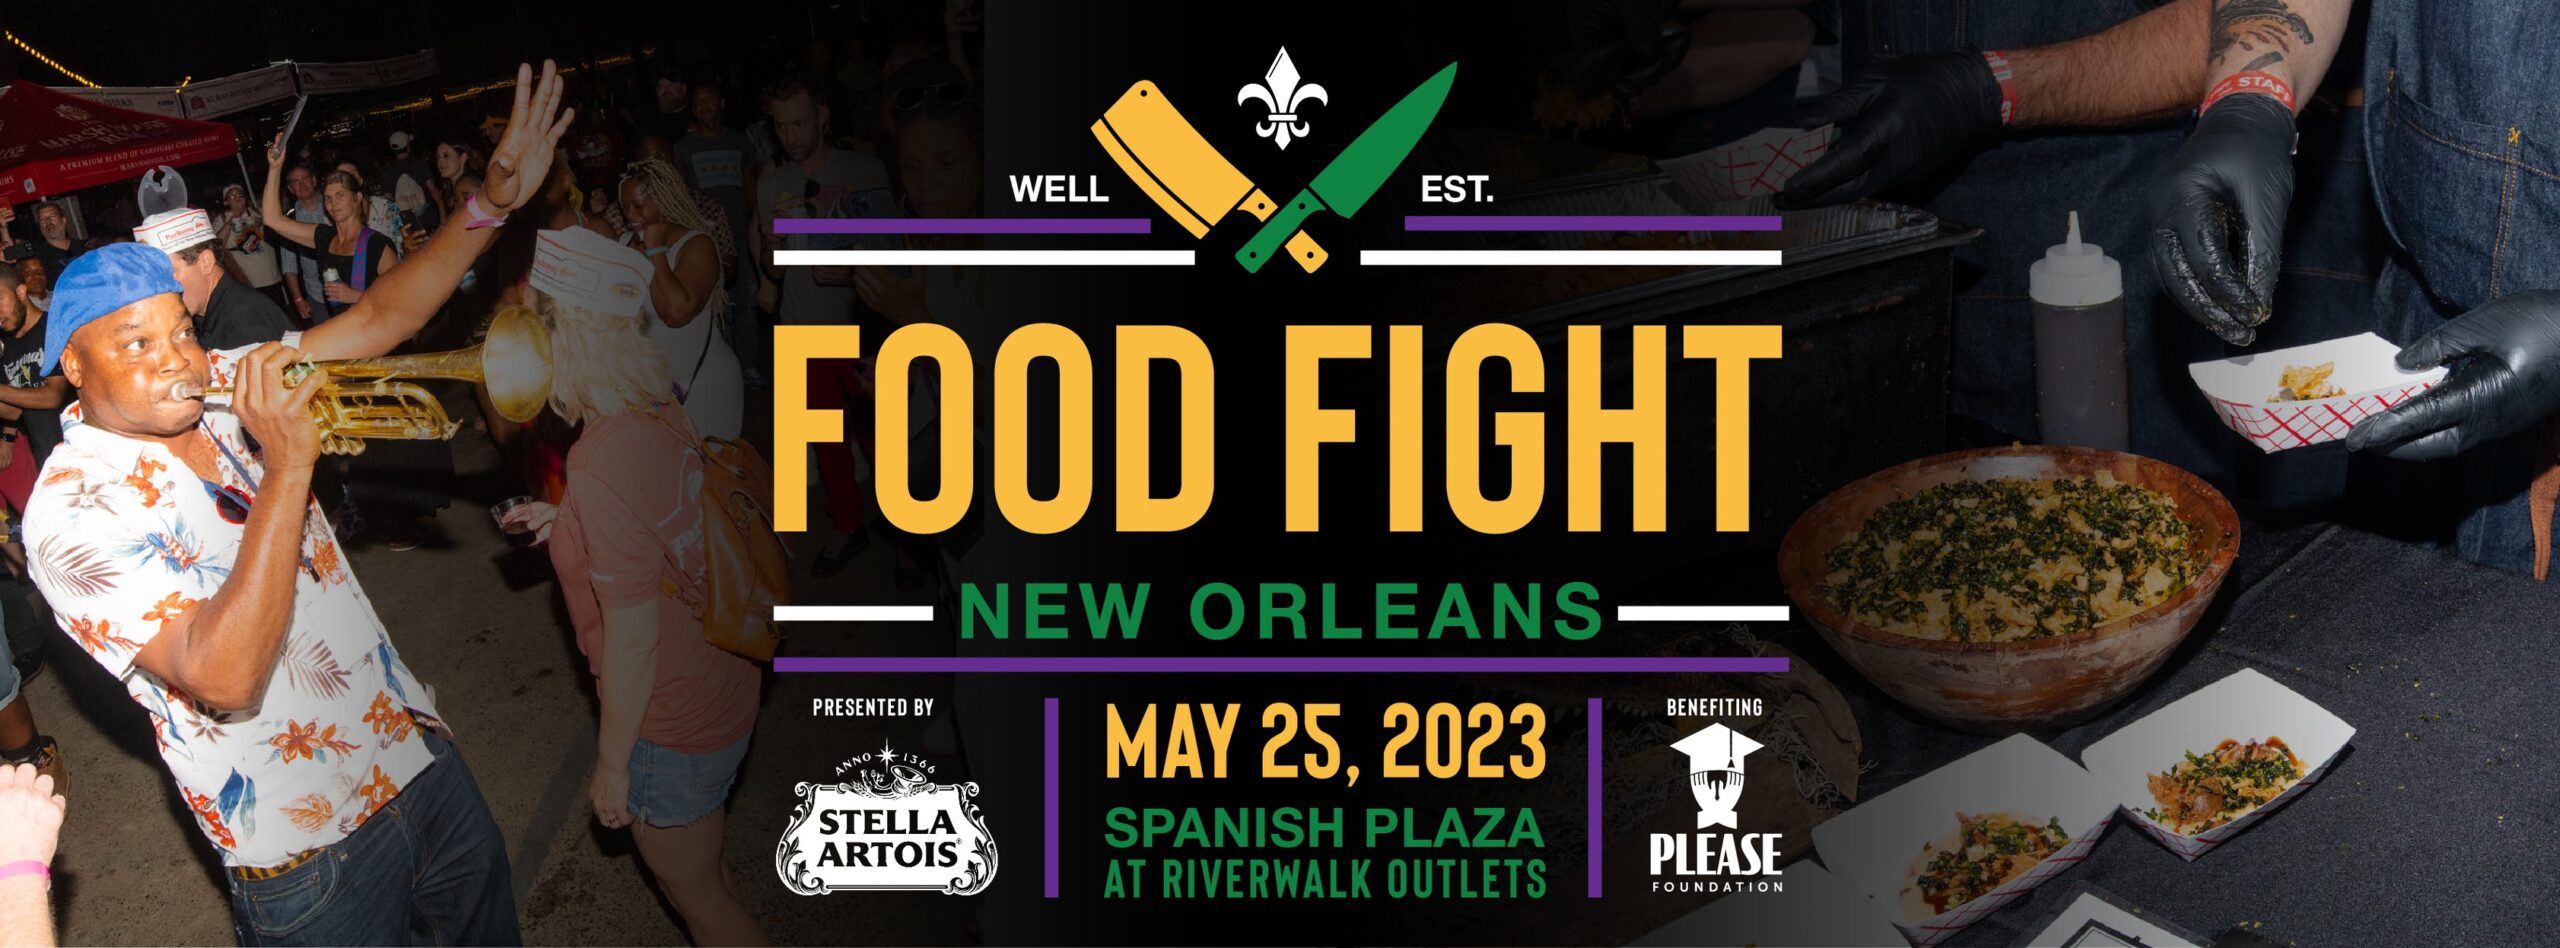 Food Fight Nola New Orleans Local